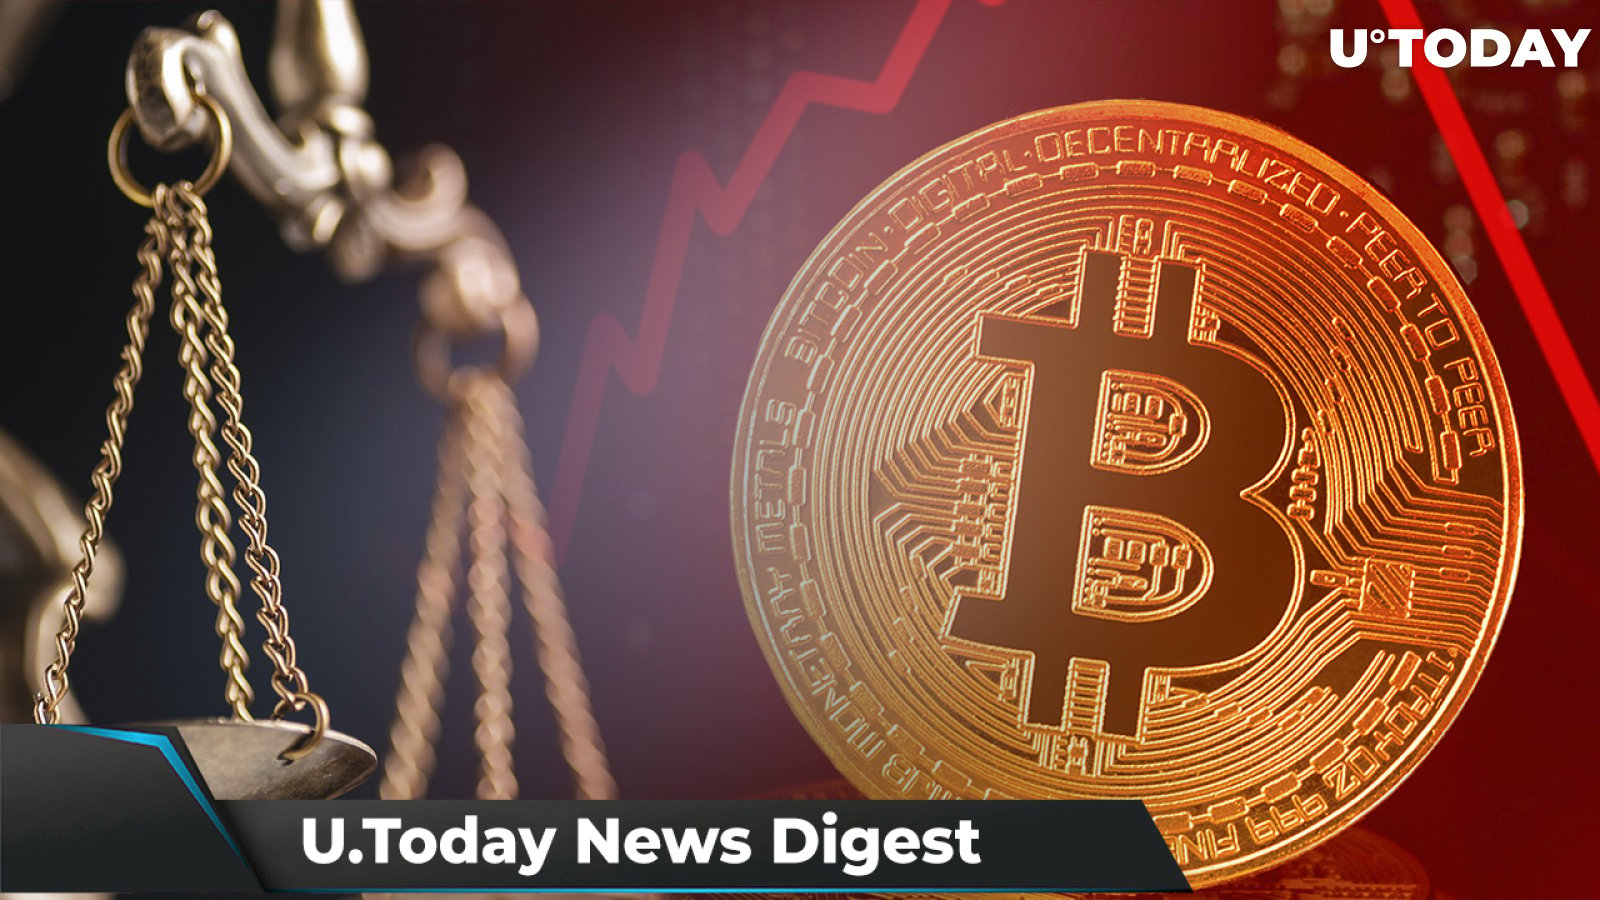 Fed Hikes Interest Rates, Ripple Partner and Well Fargo Work on SWIFT Replacement, 100 Million XRP Grabbed by Whale: Crypto News Digest by U.Today